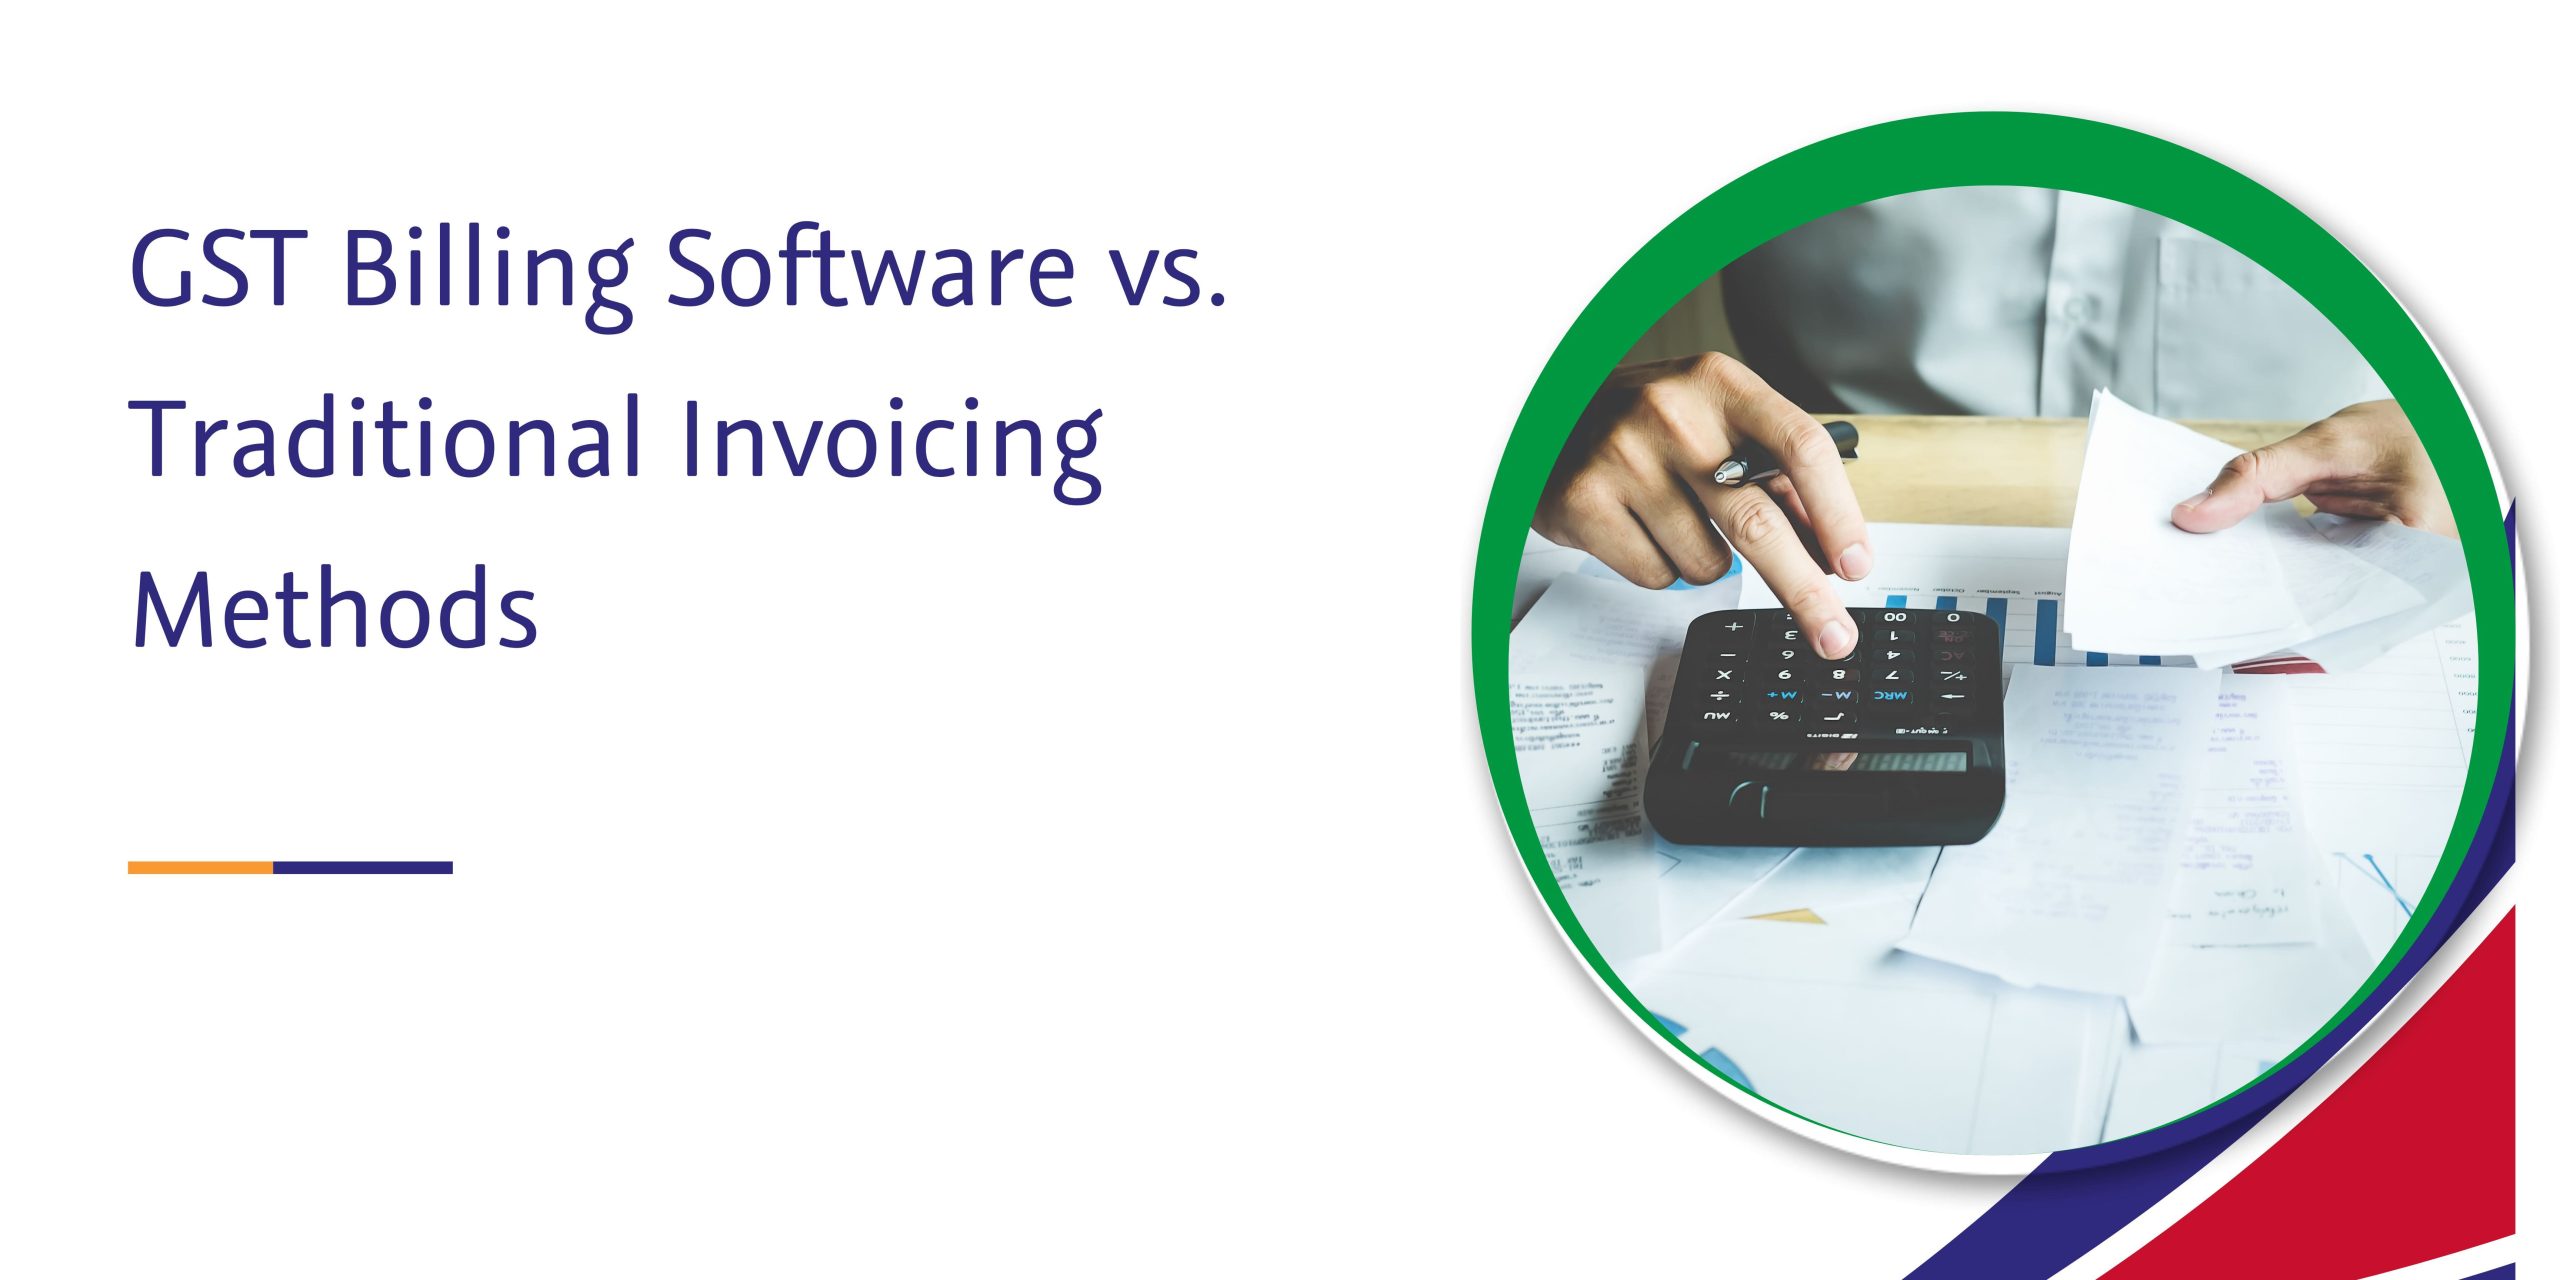 GST Billing Software vs. Traditional Invoicing Methods